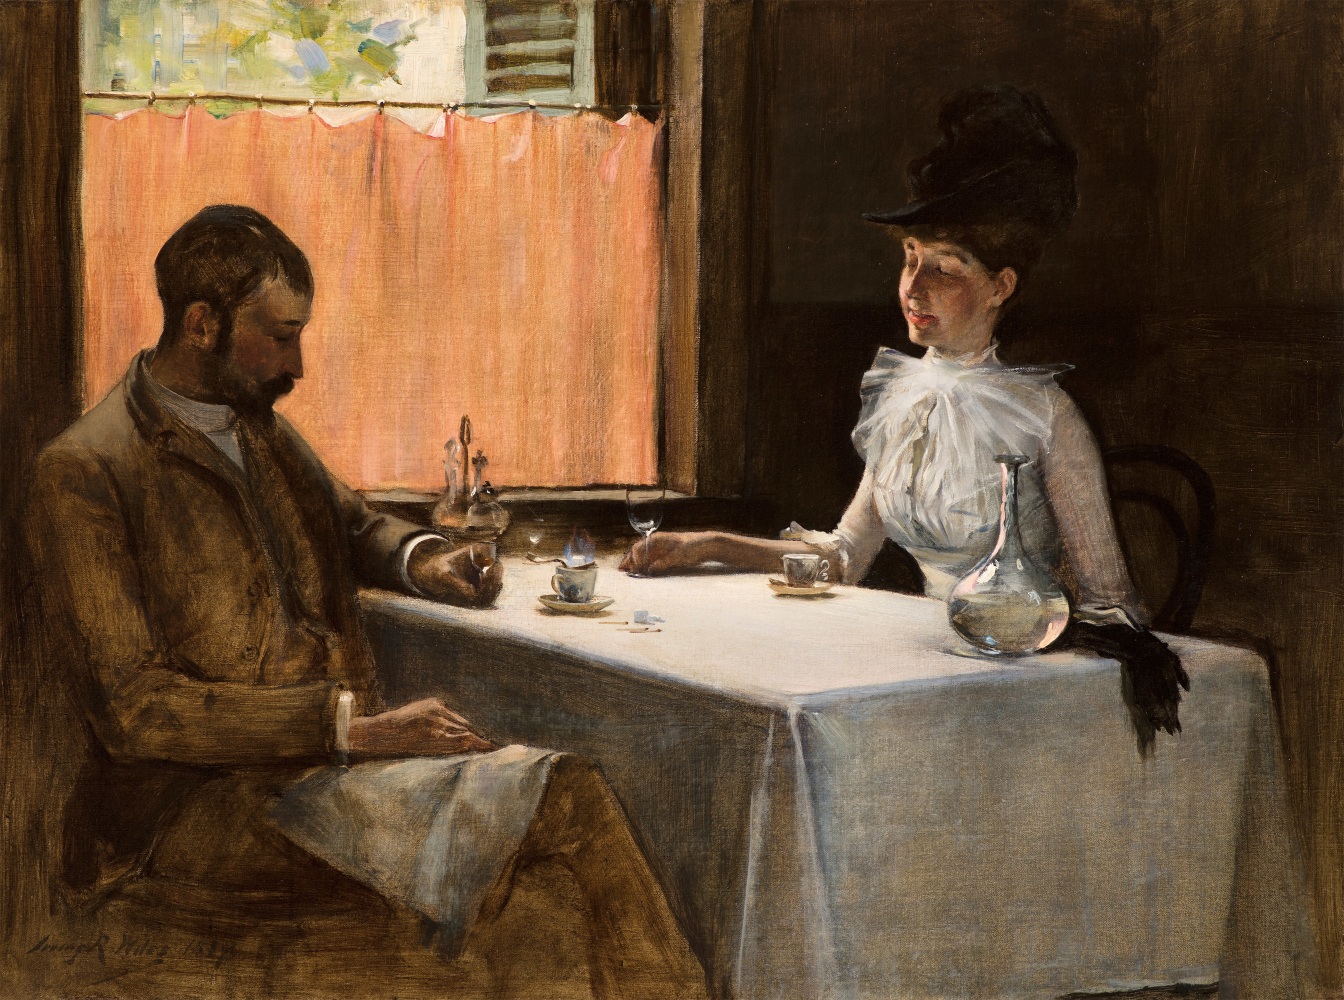 Irving Ramsey Wiles (1861–1948), The Loiterers, 1887, oil on canvas, 18 x 24 in., signed and dated lower left: Irving R. Wiles 1887. The artist and his wife seated in a Parisian cafe.